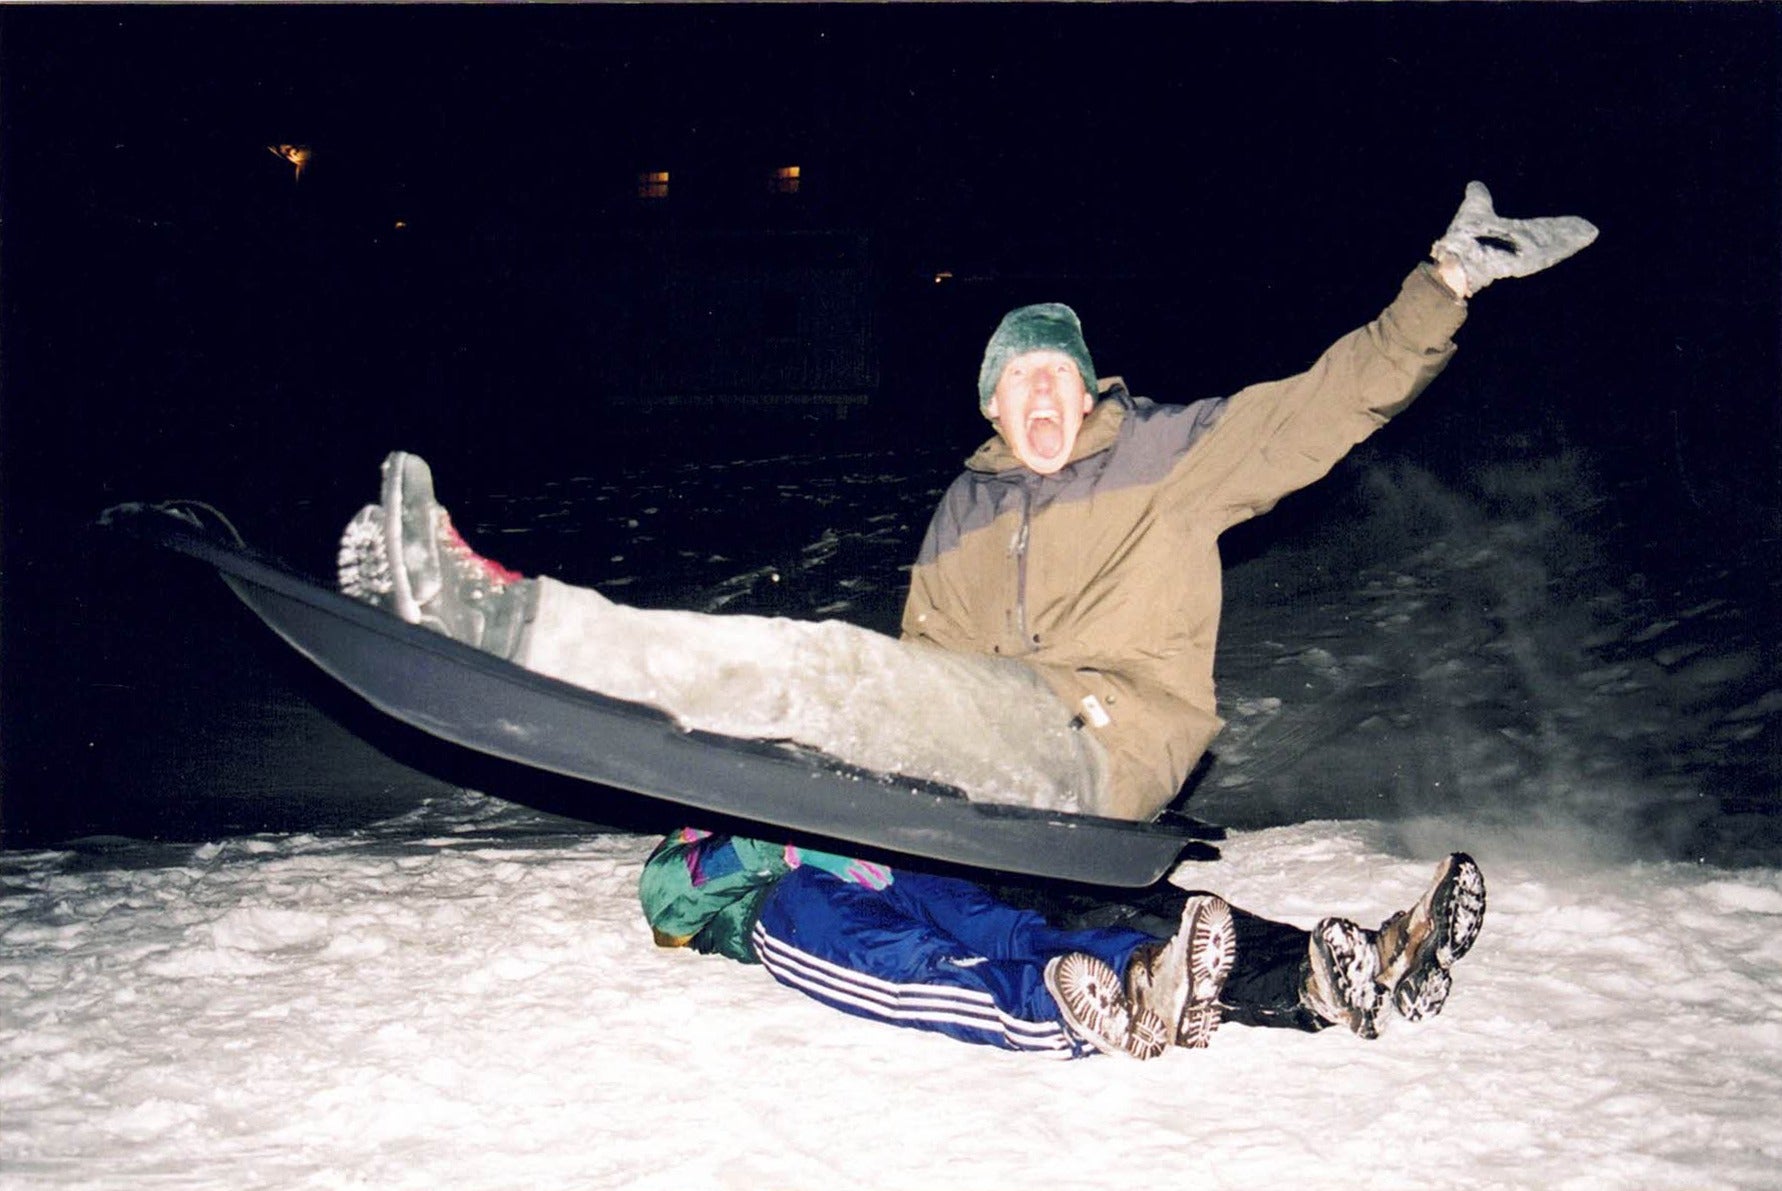 a dramatic photo of Colin in a tobbogan, mid air, above two people lying in the snow.